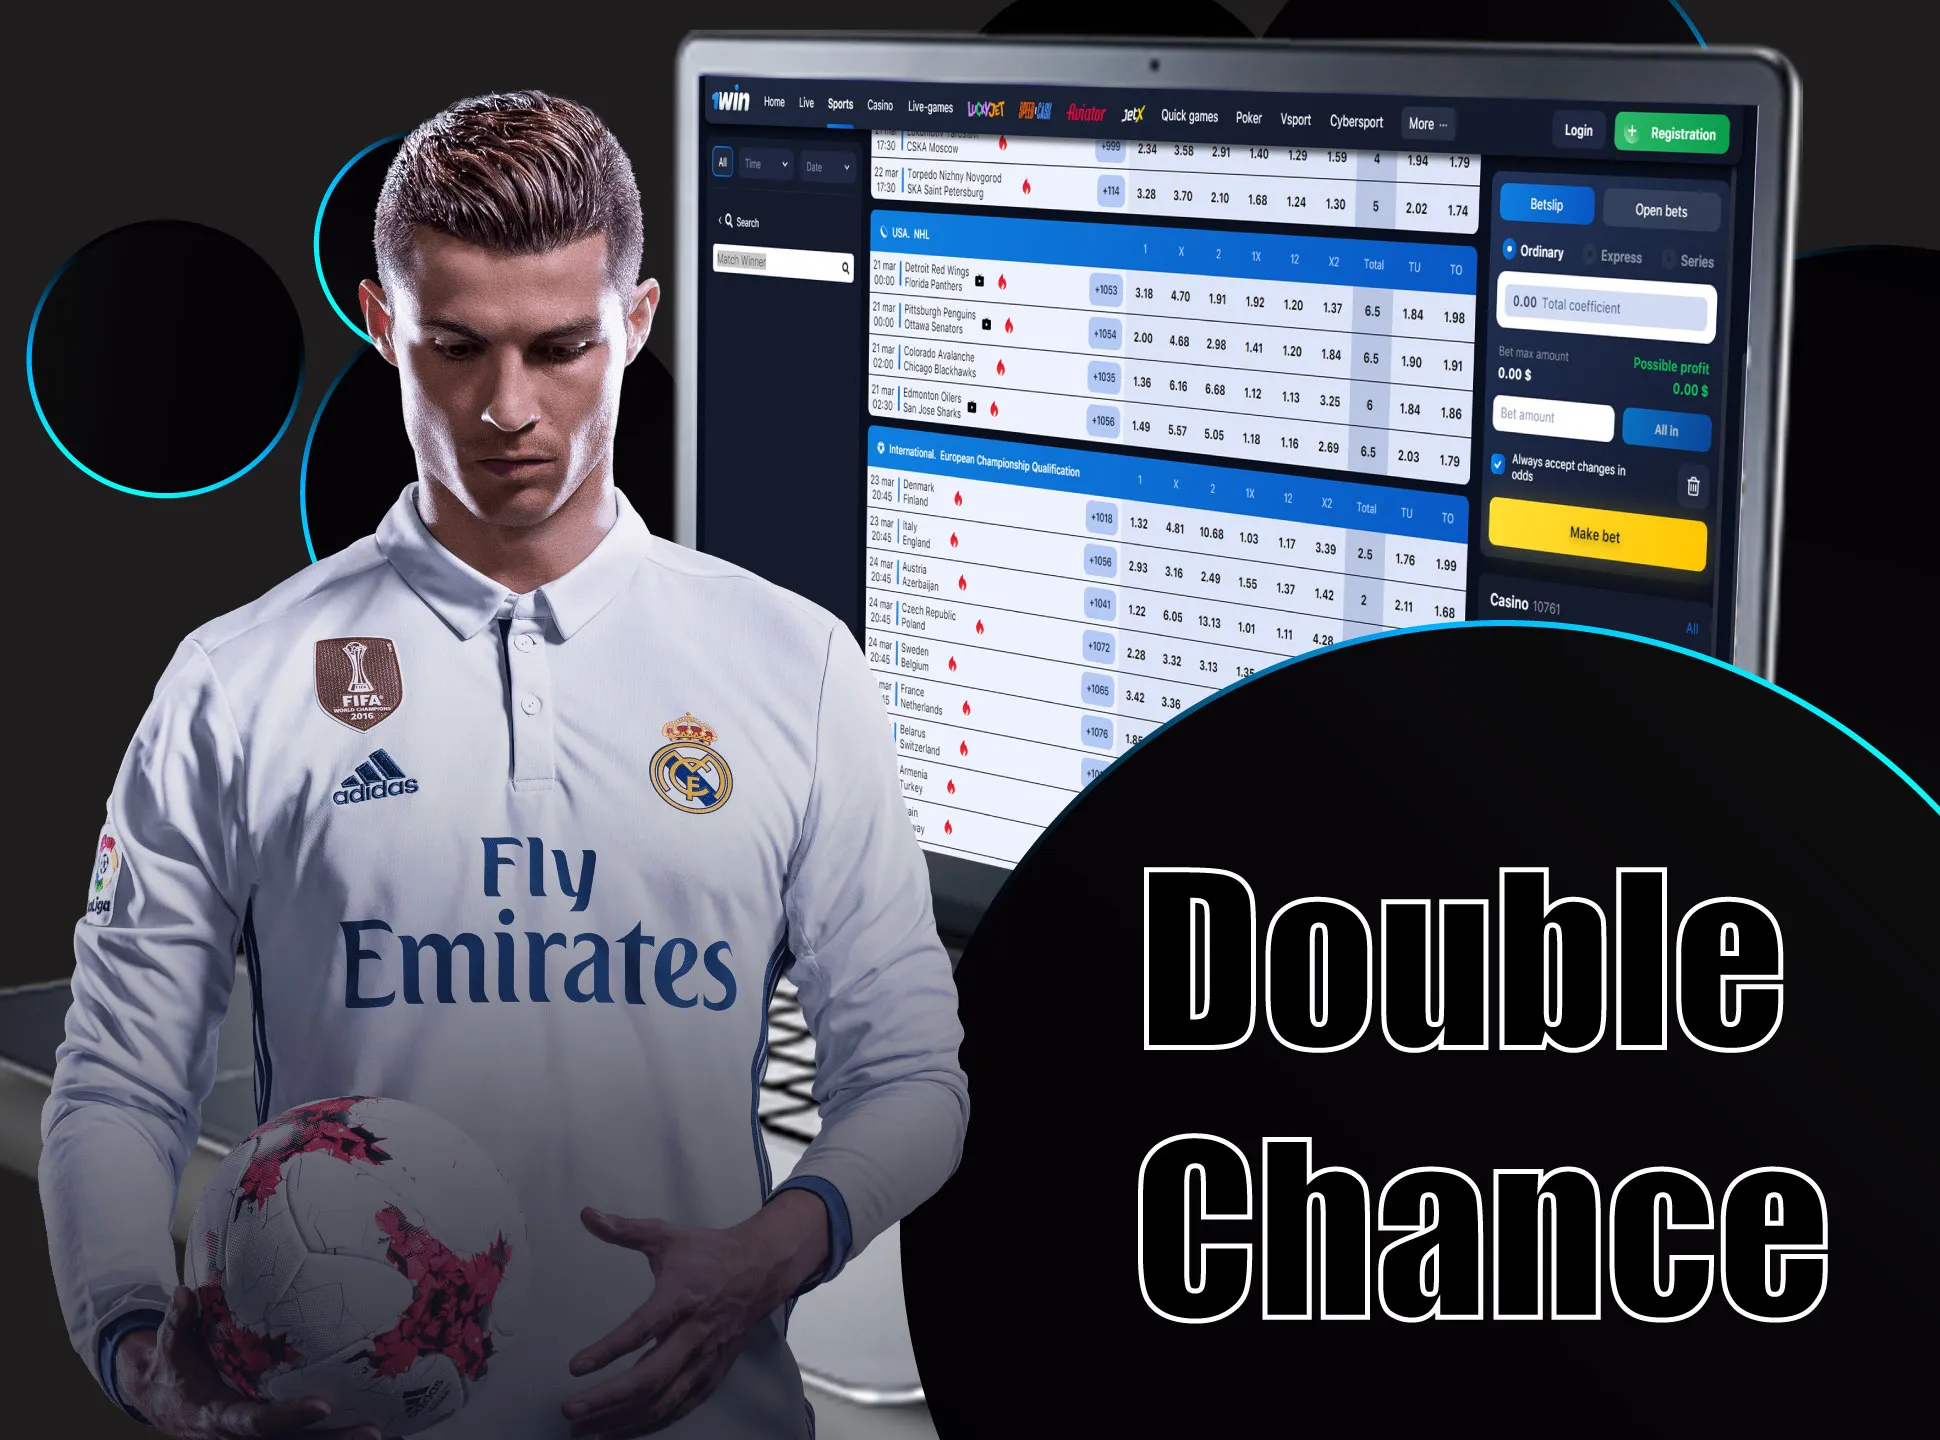 Double chance bet gives you more chances to win.